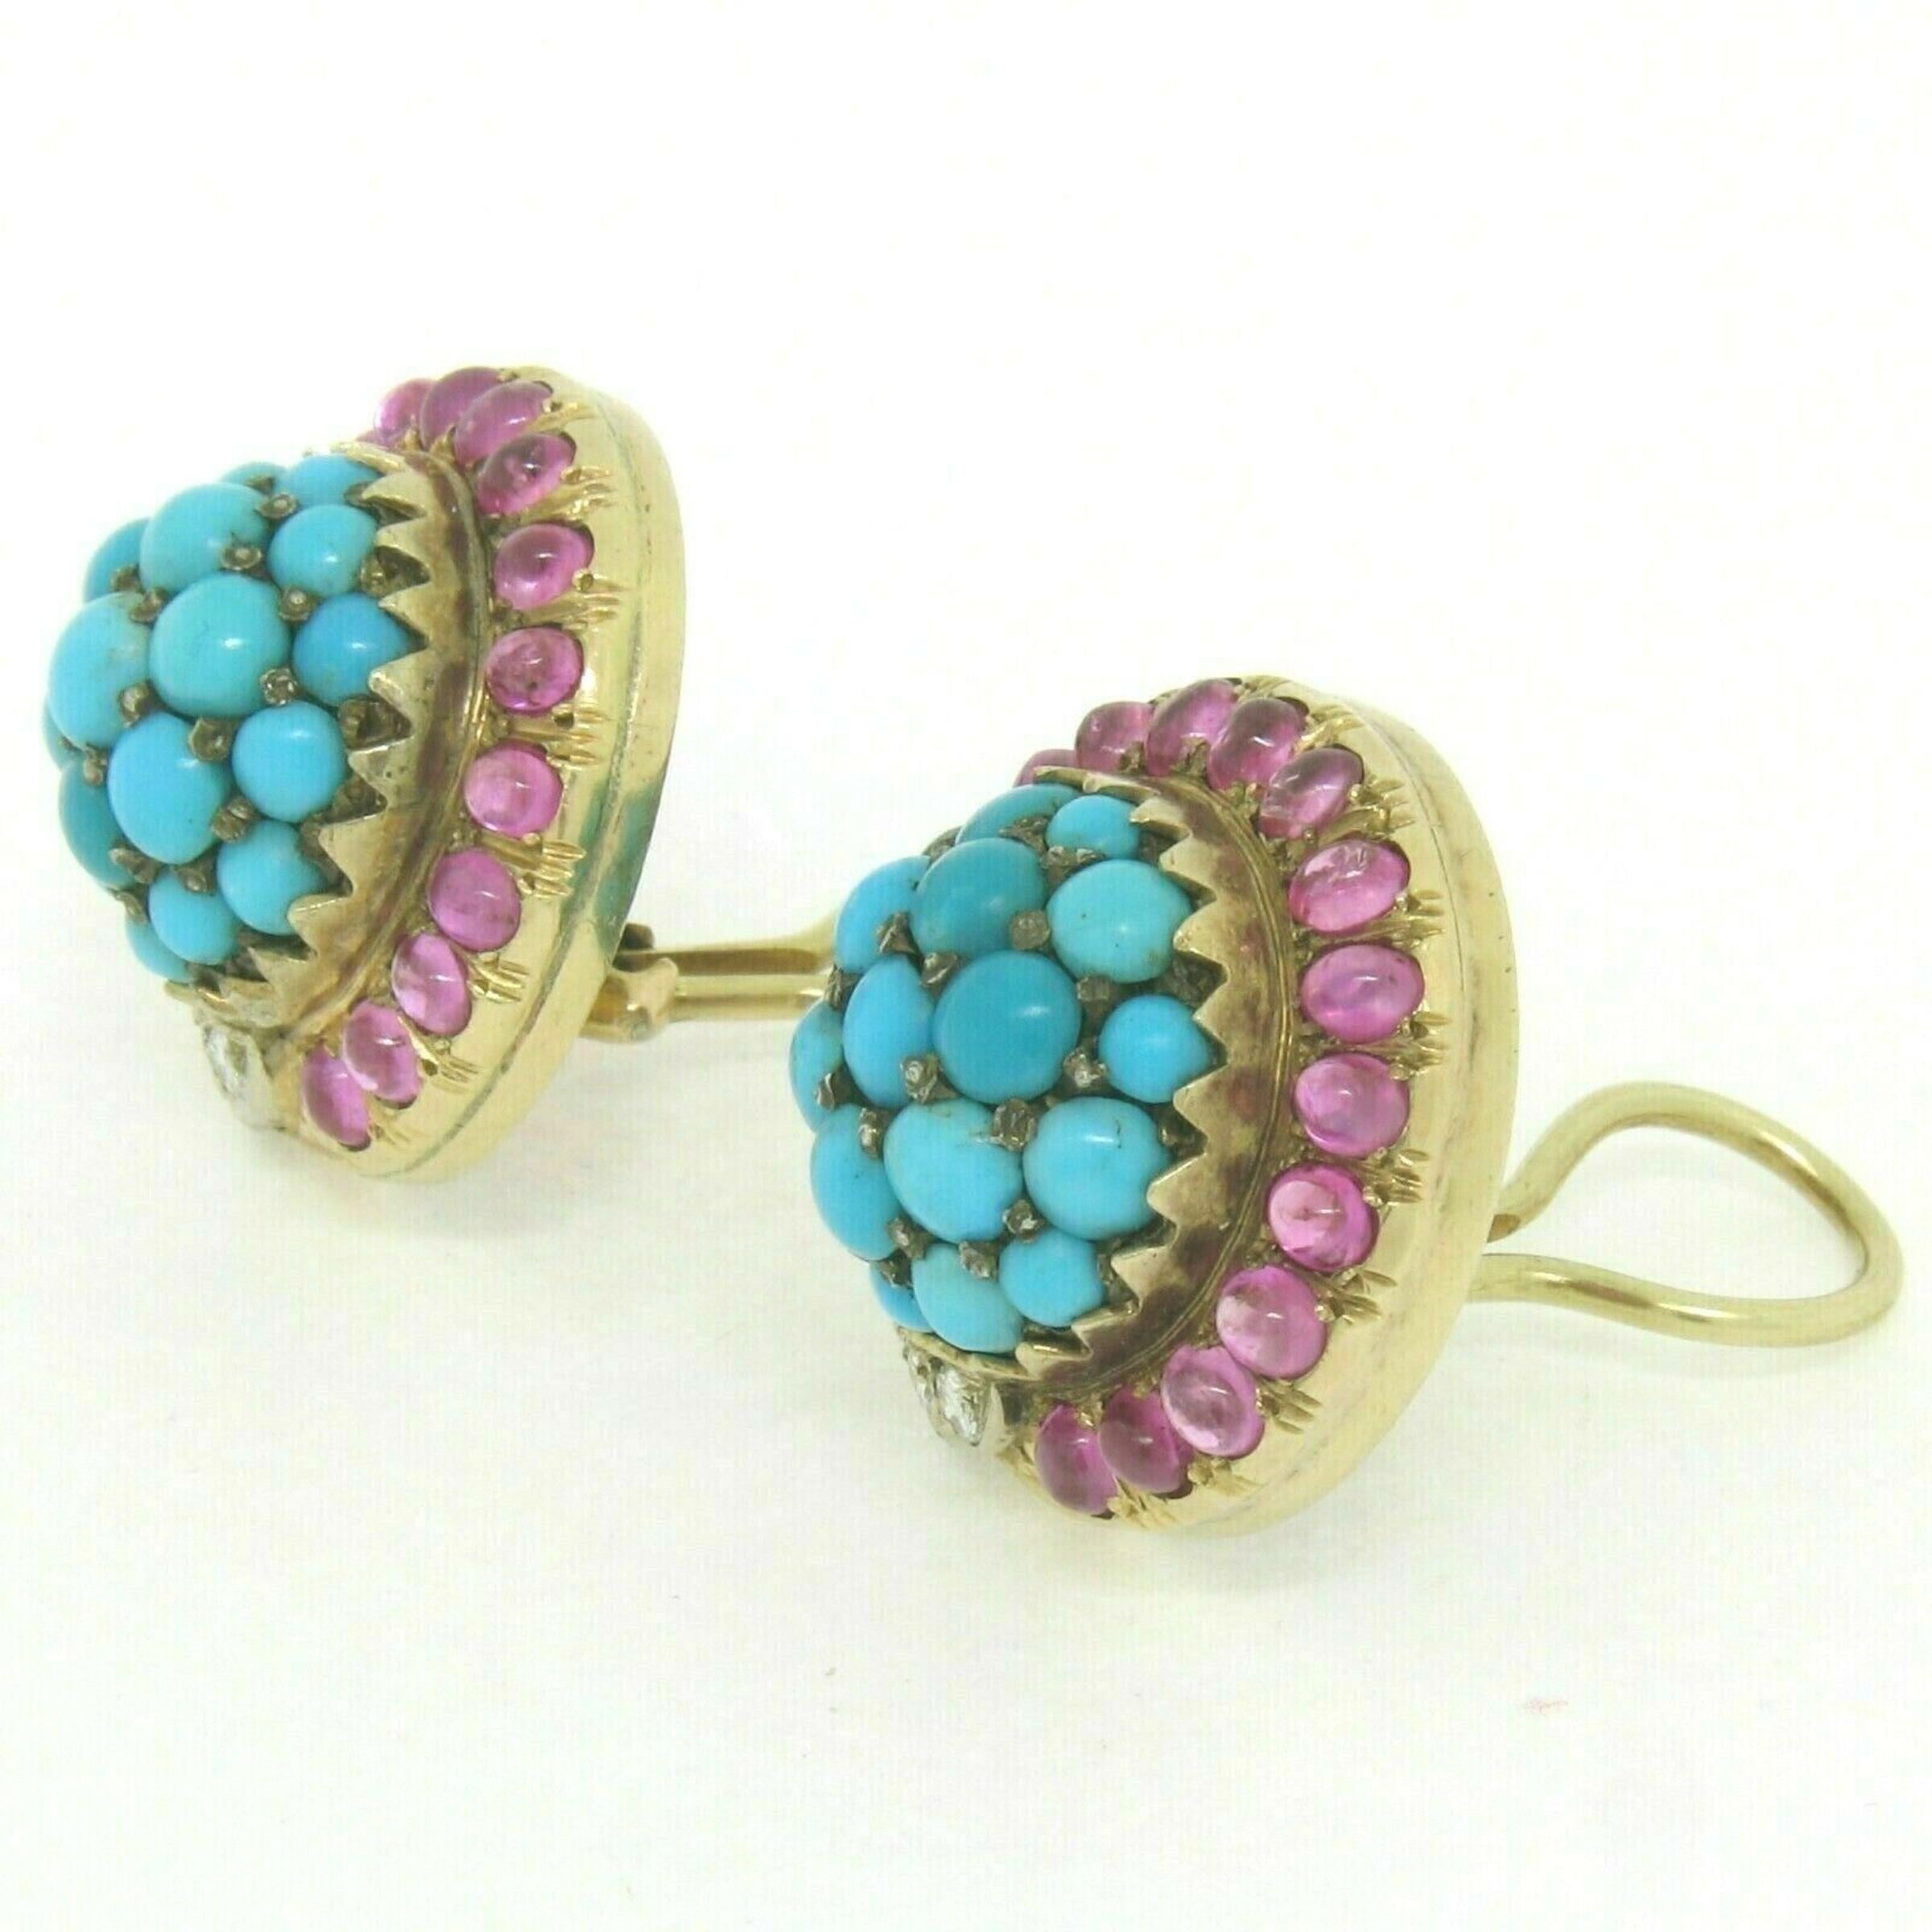 You are looking at a gorgeous vintage pair of turquoise, ruby, and diamond cluster earrings crafted in solid 14k yellow gold. There are 38 round cabochon turquoise stones which structure the center cluster of each earring. The center cluster is then